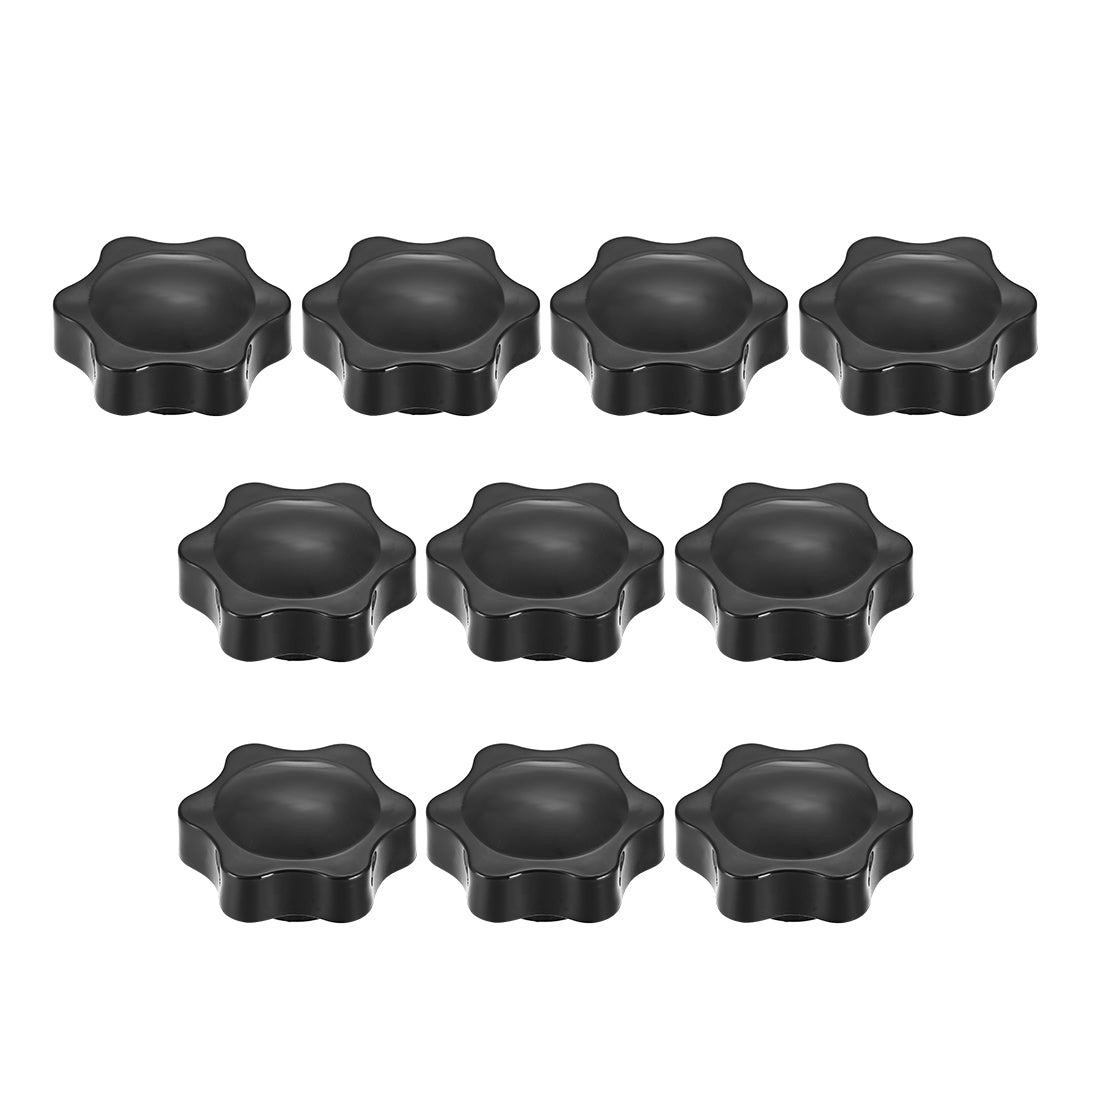 uxcell Uxcell Clamping Handle Gripandles Screw Knobs Handgrips Star Knob Female Thread 10pcs